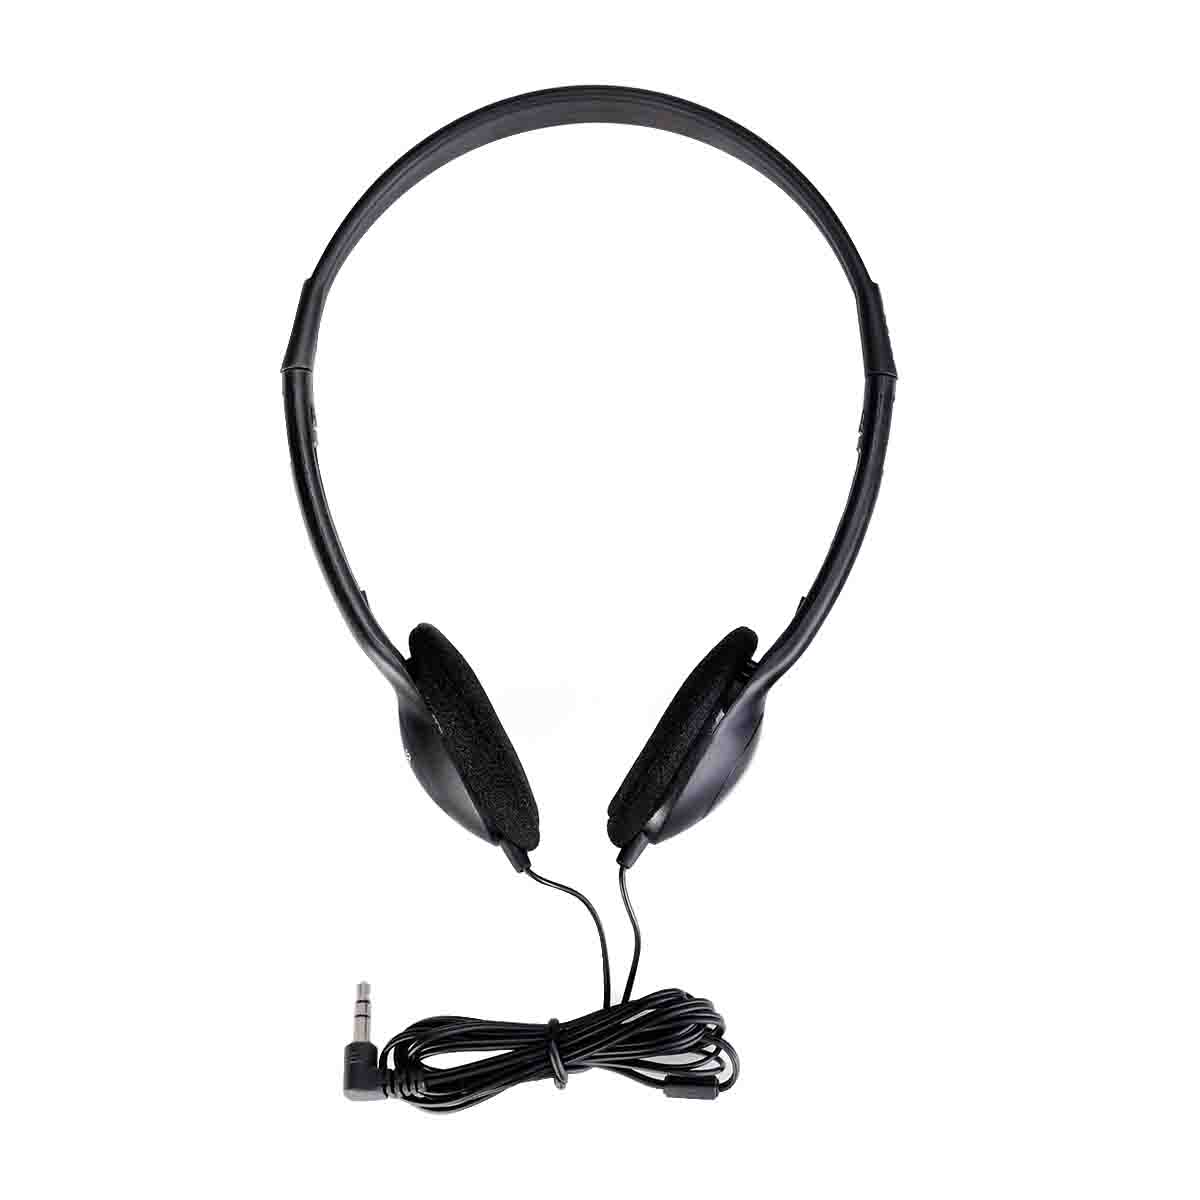 What earpieces can you use for Retekess Tour guide receivers?